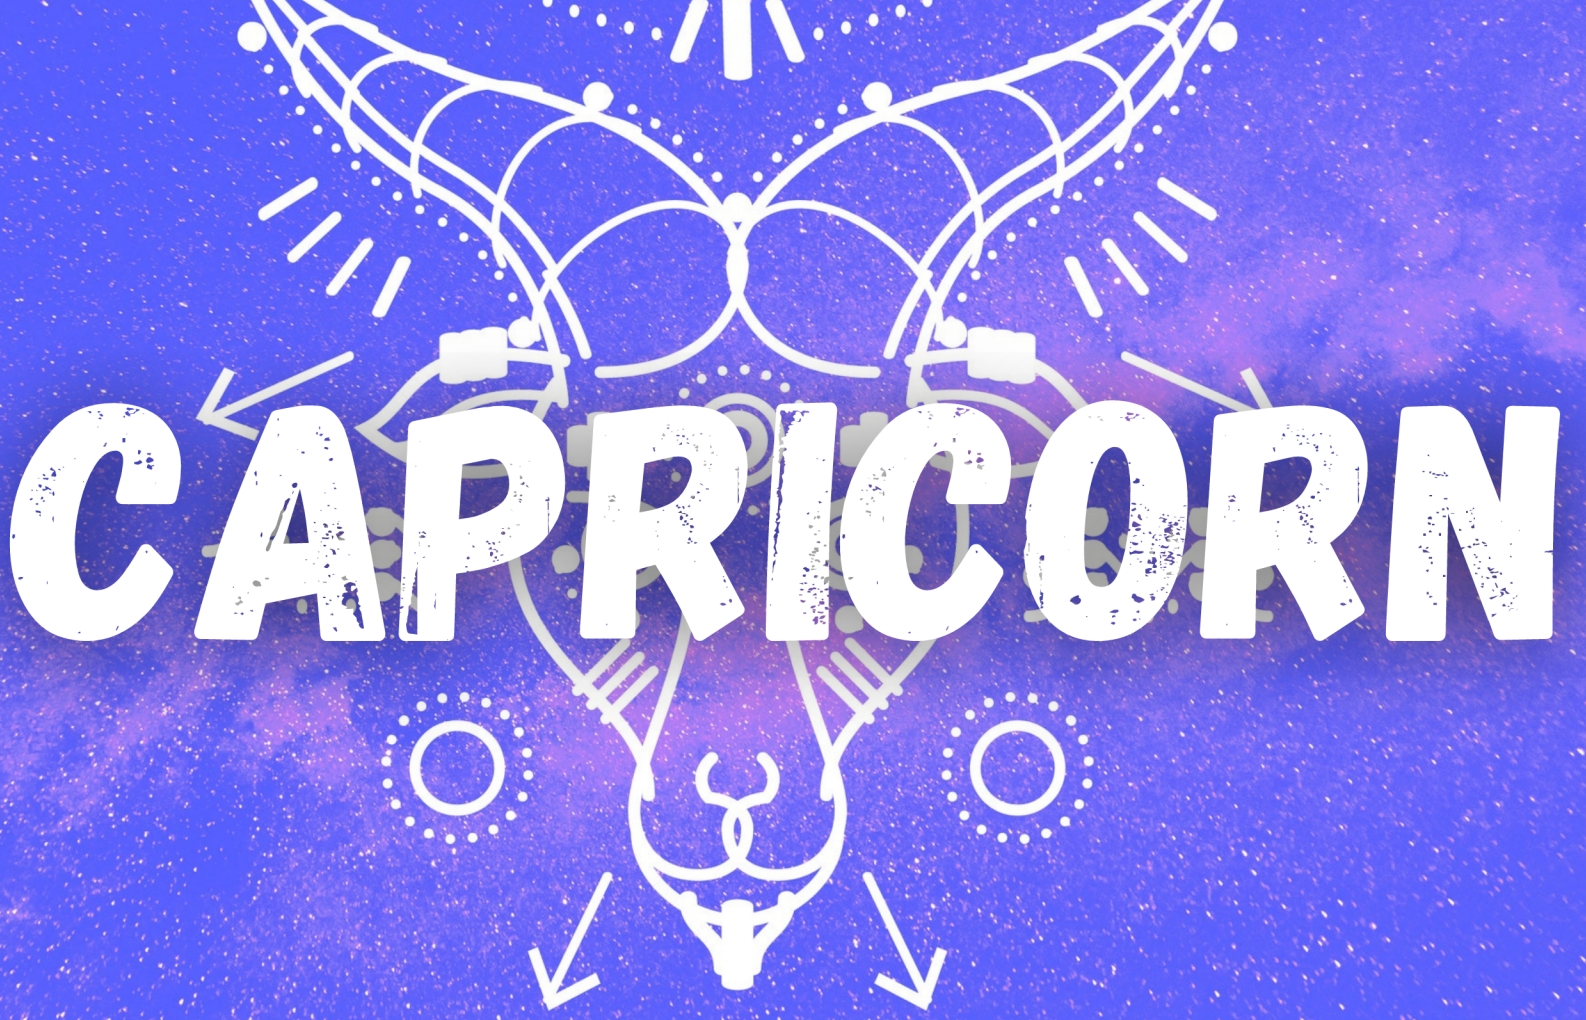 CAPRICORN Horoscope October 2021 - Monthly Predictions for Love, Health, Career and Money